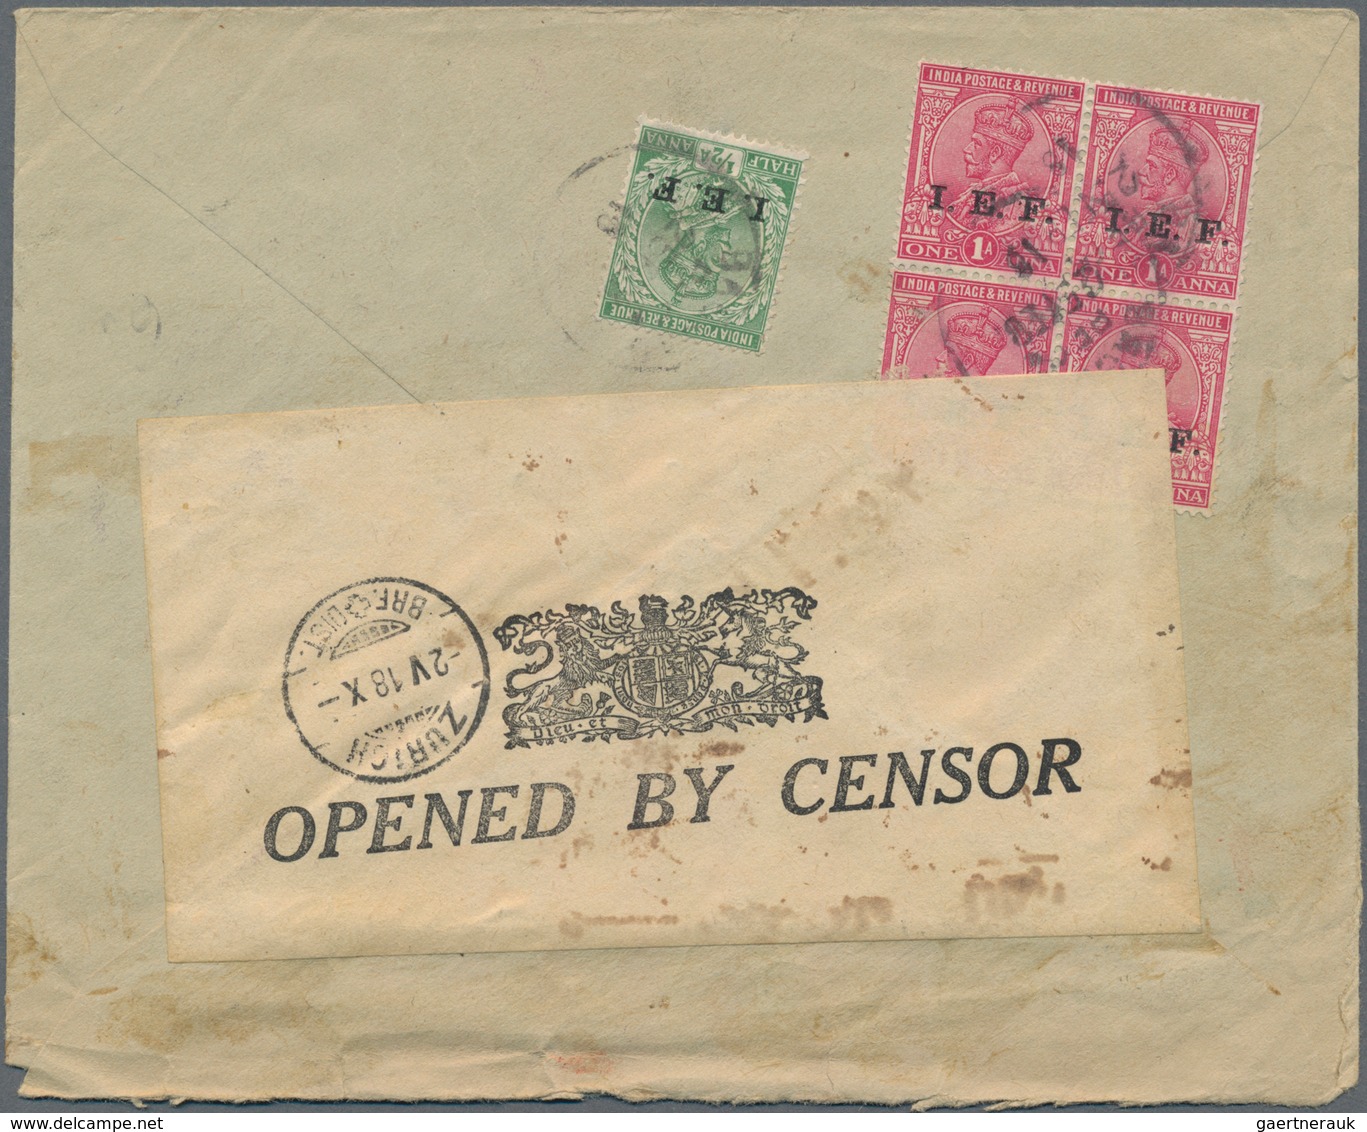 Indien - Feldpost: 1918 Registered And Censored Cover From Baghdad To Zurich, Switzerland Franked On - Franquicia Militar